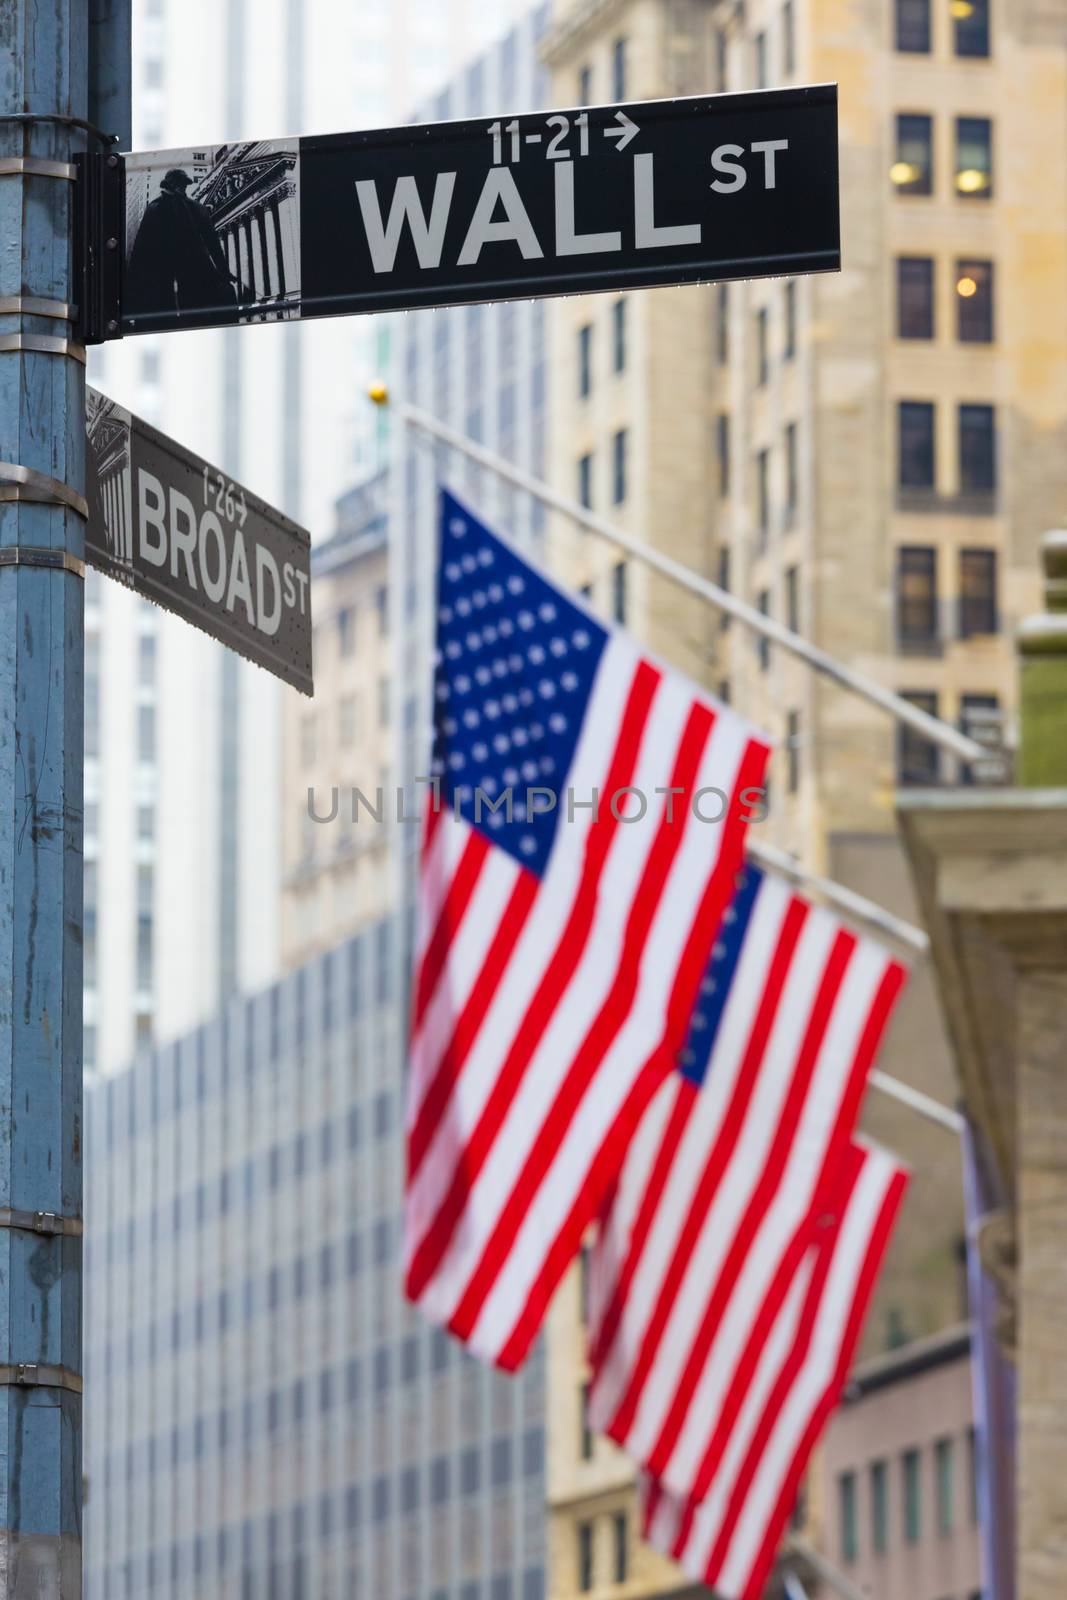 Wall street sign in New York with American flags and New York Stock Exchange background.